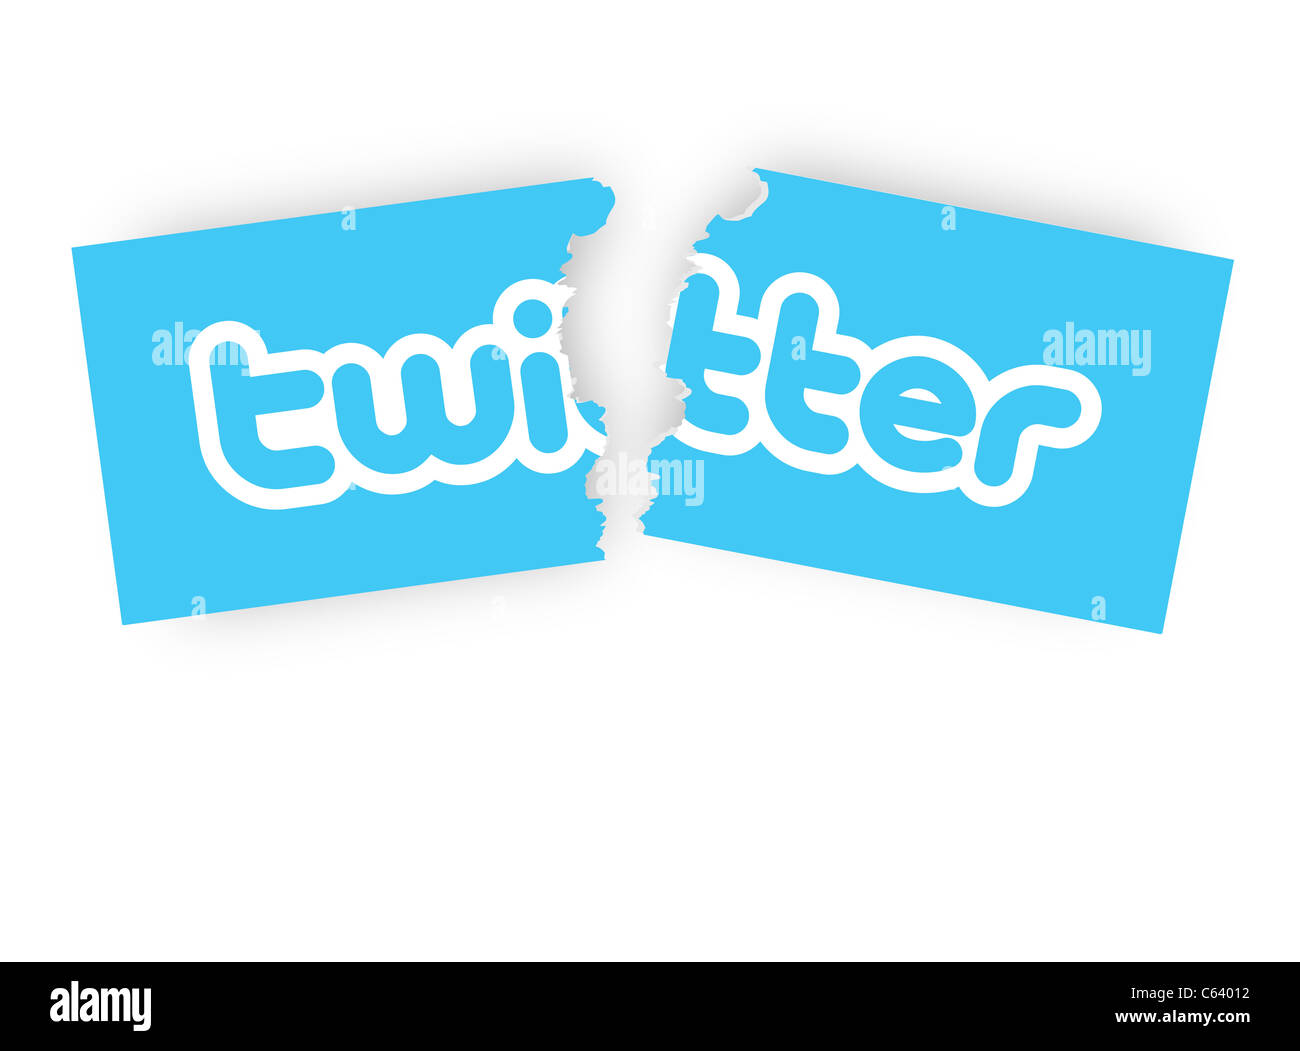 concepts of quit twitter, by tearing the twitter sticker half. Stock Photo